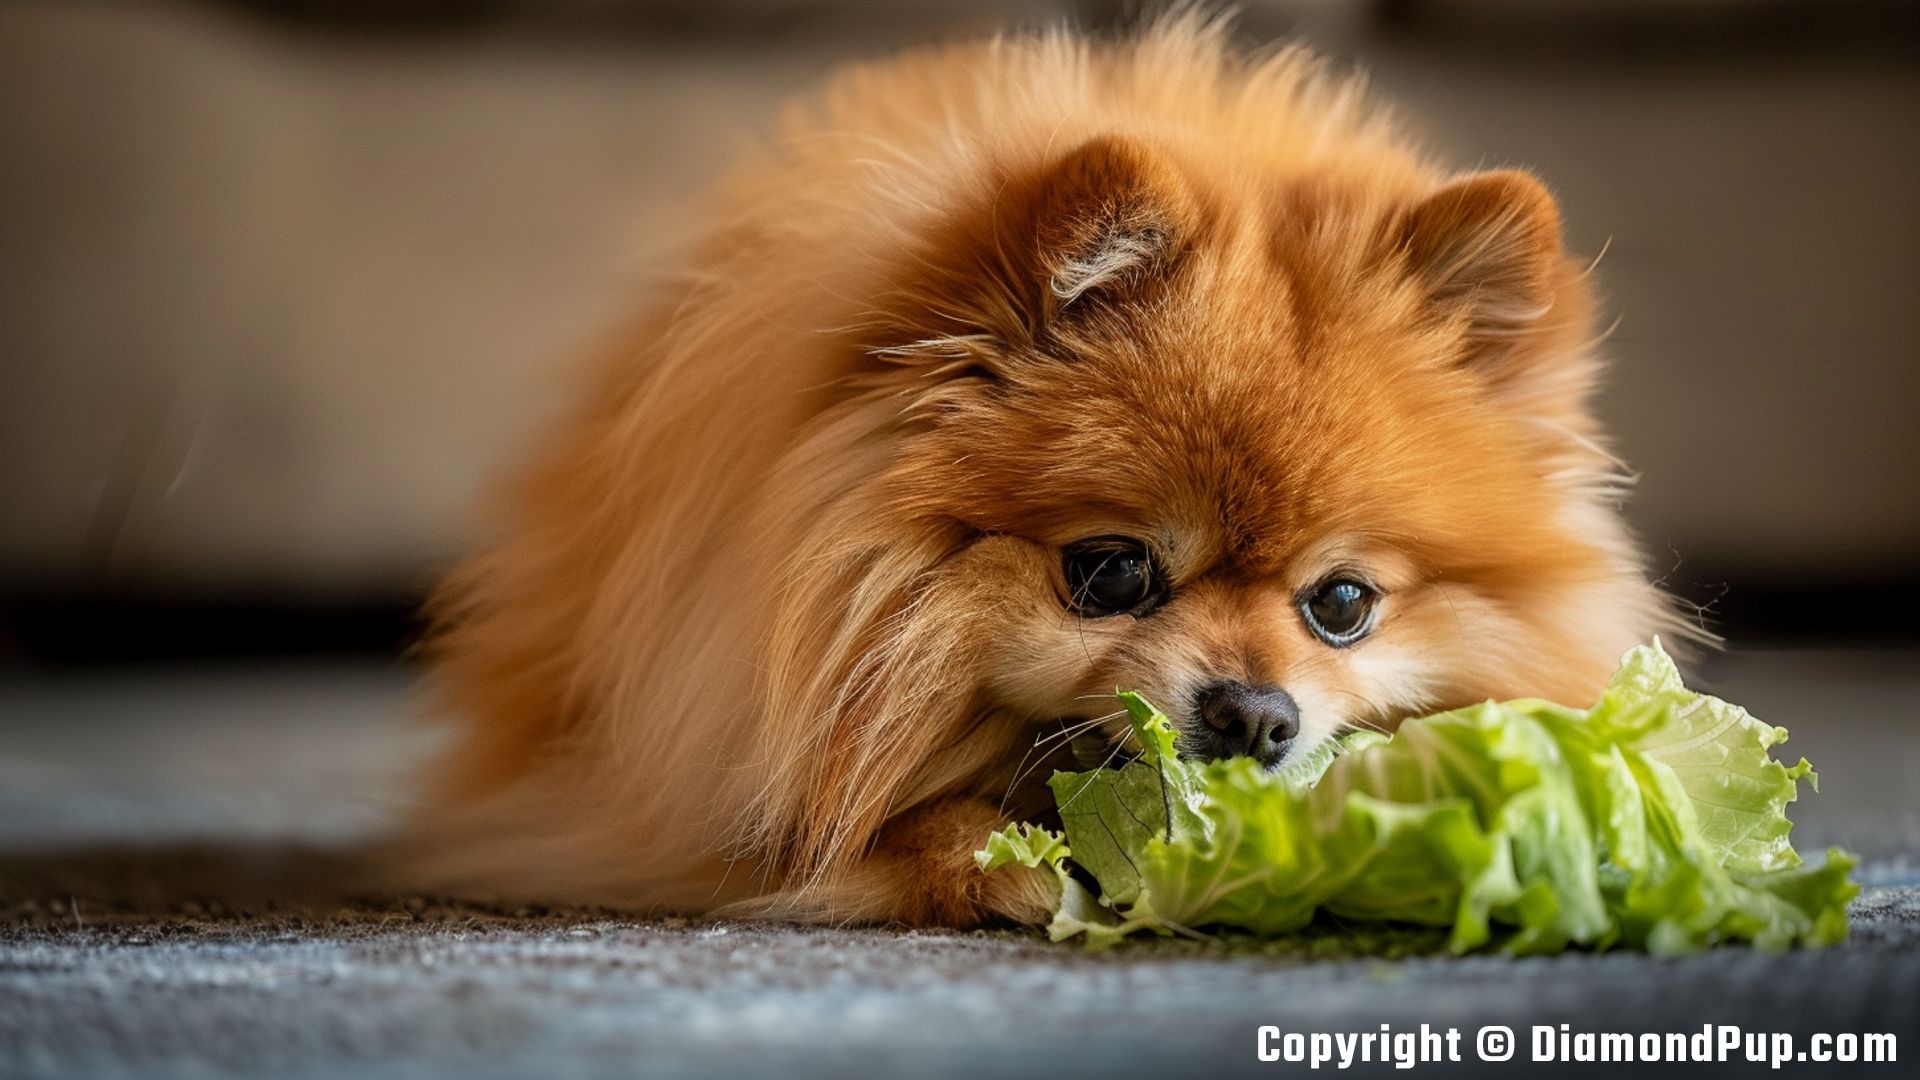 Photograph of a Happy Pomeranian Snacking on Lettuce